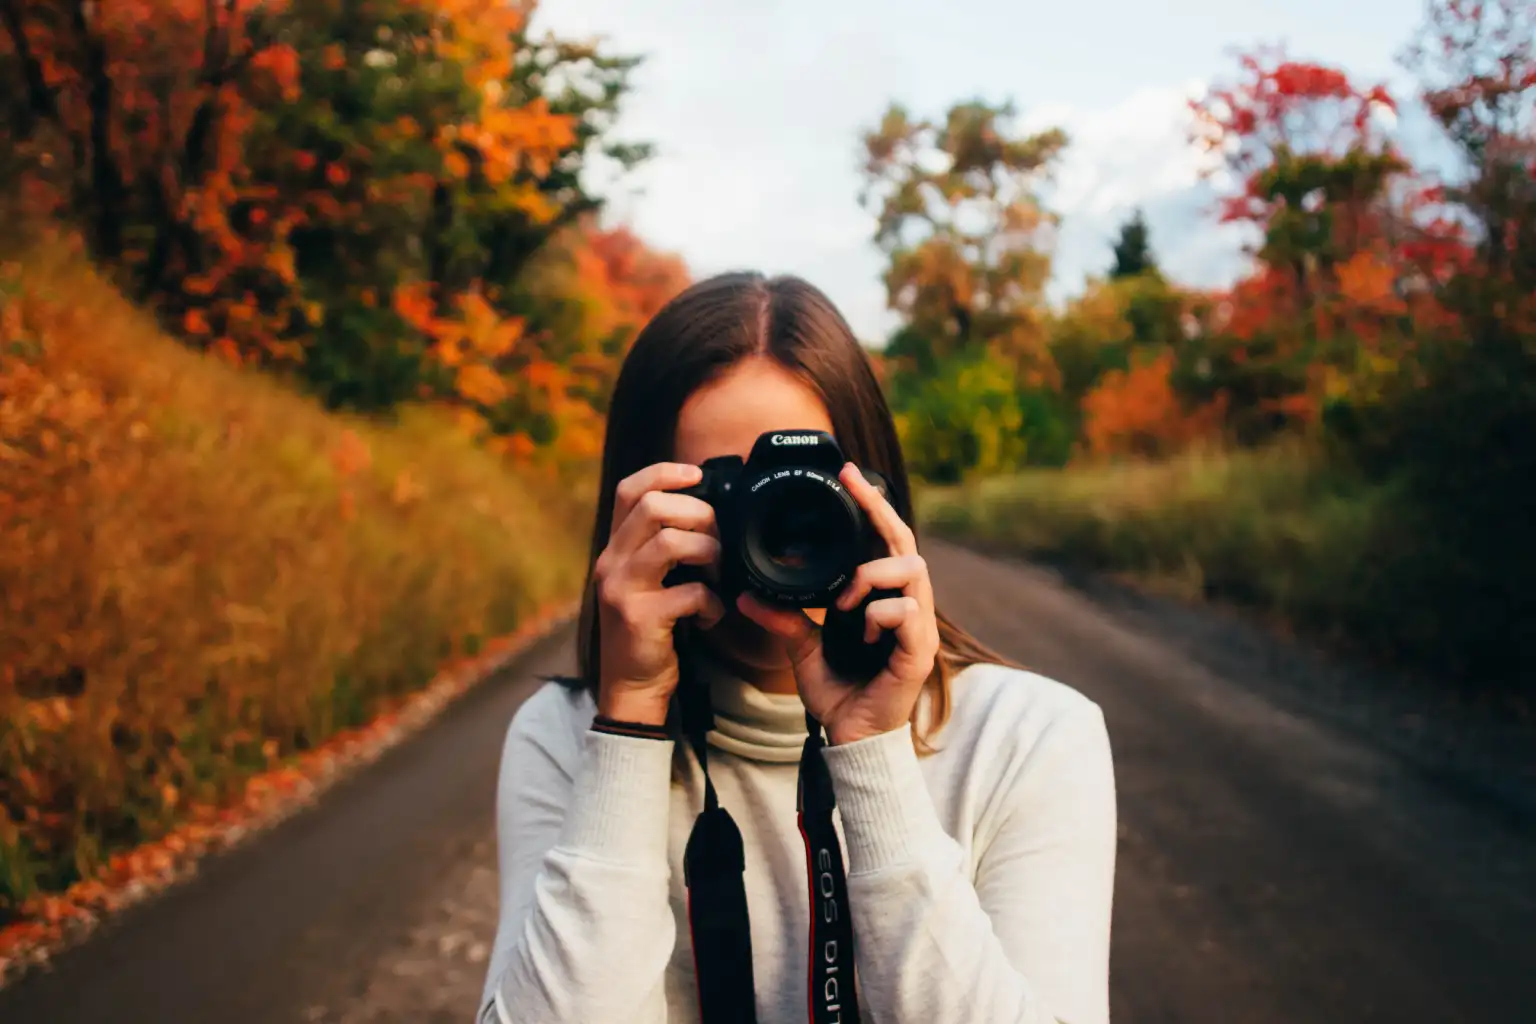 HIRE A VIRGINIA PHOTOGRAPHER WITH 20 FOOLPROOF TIPS